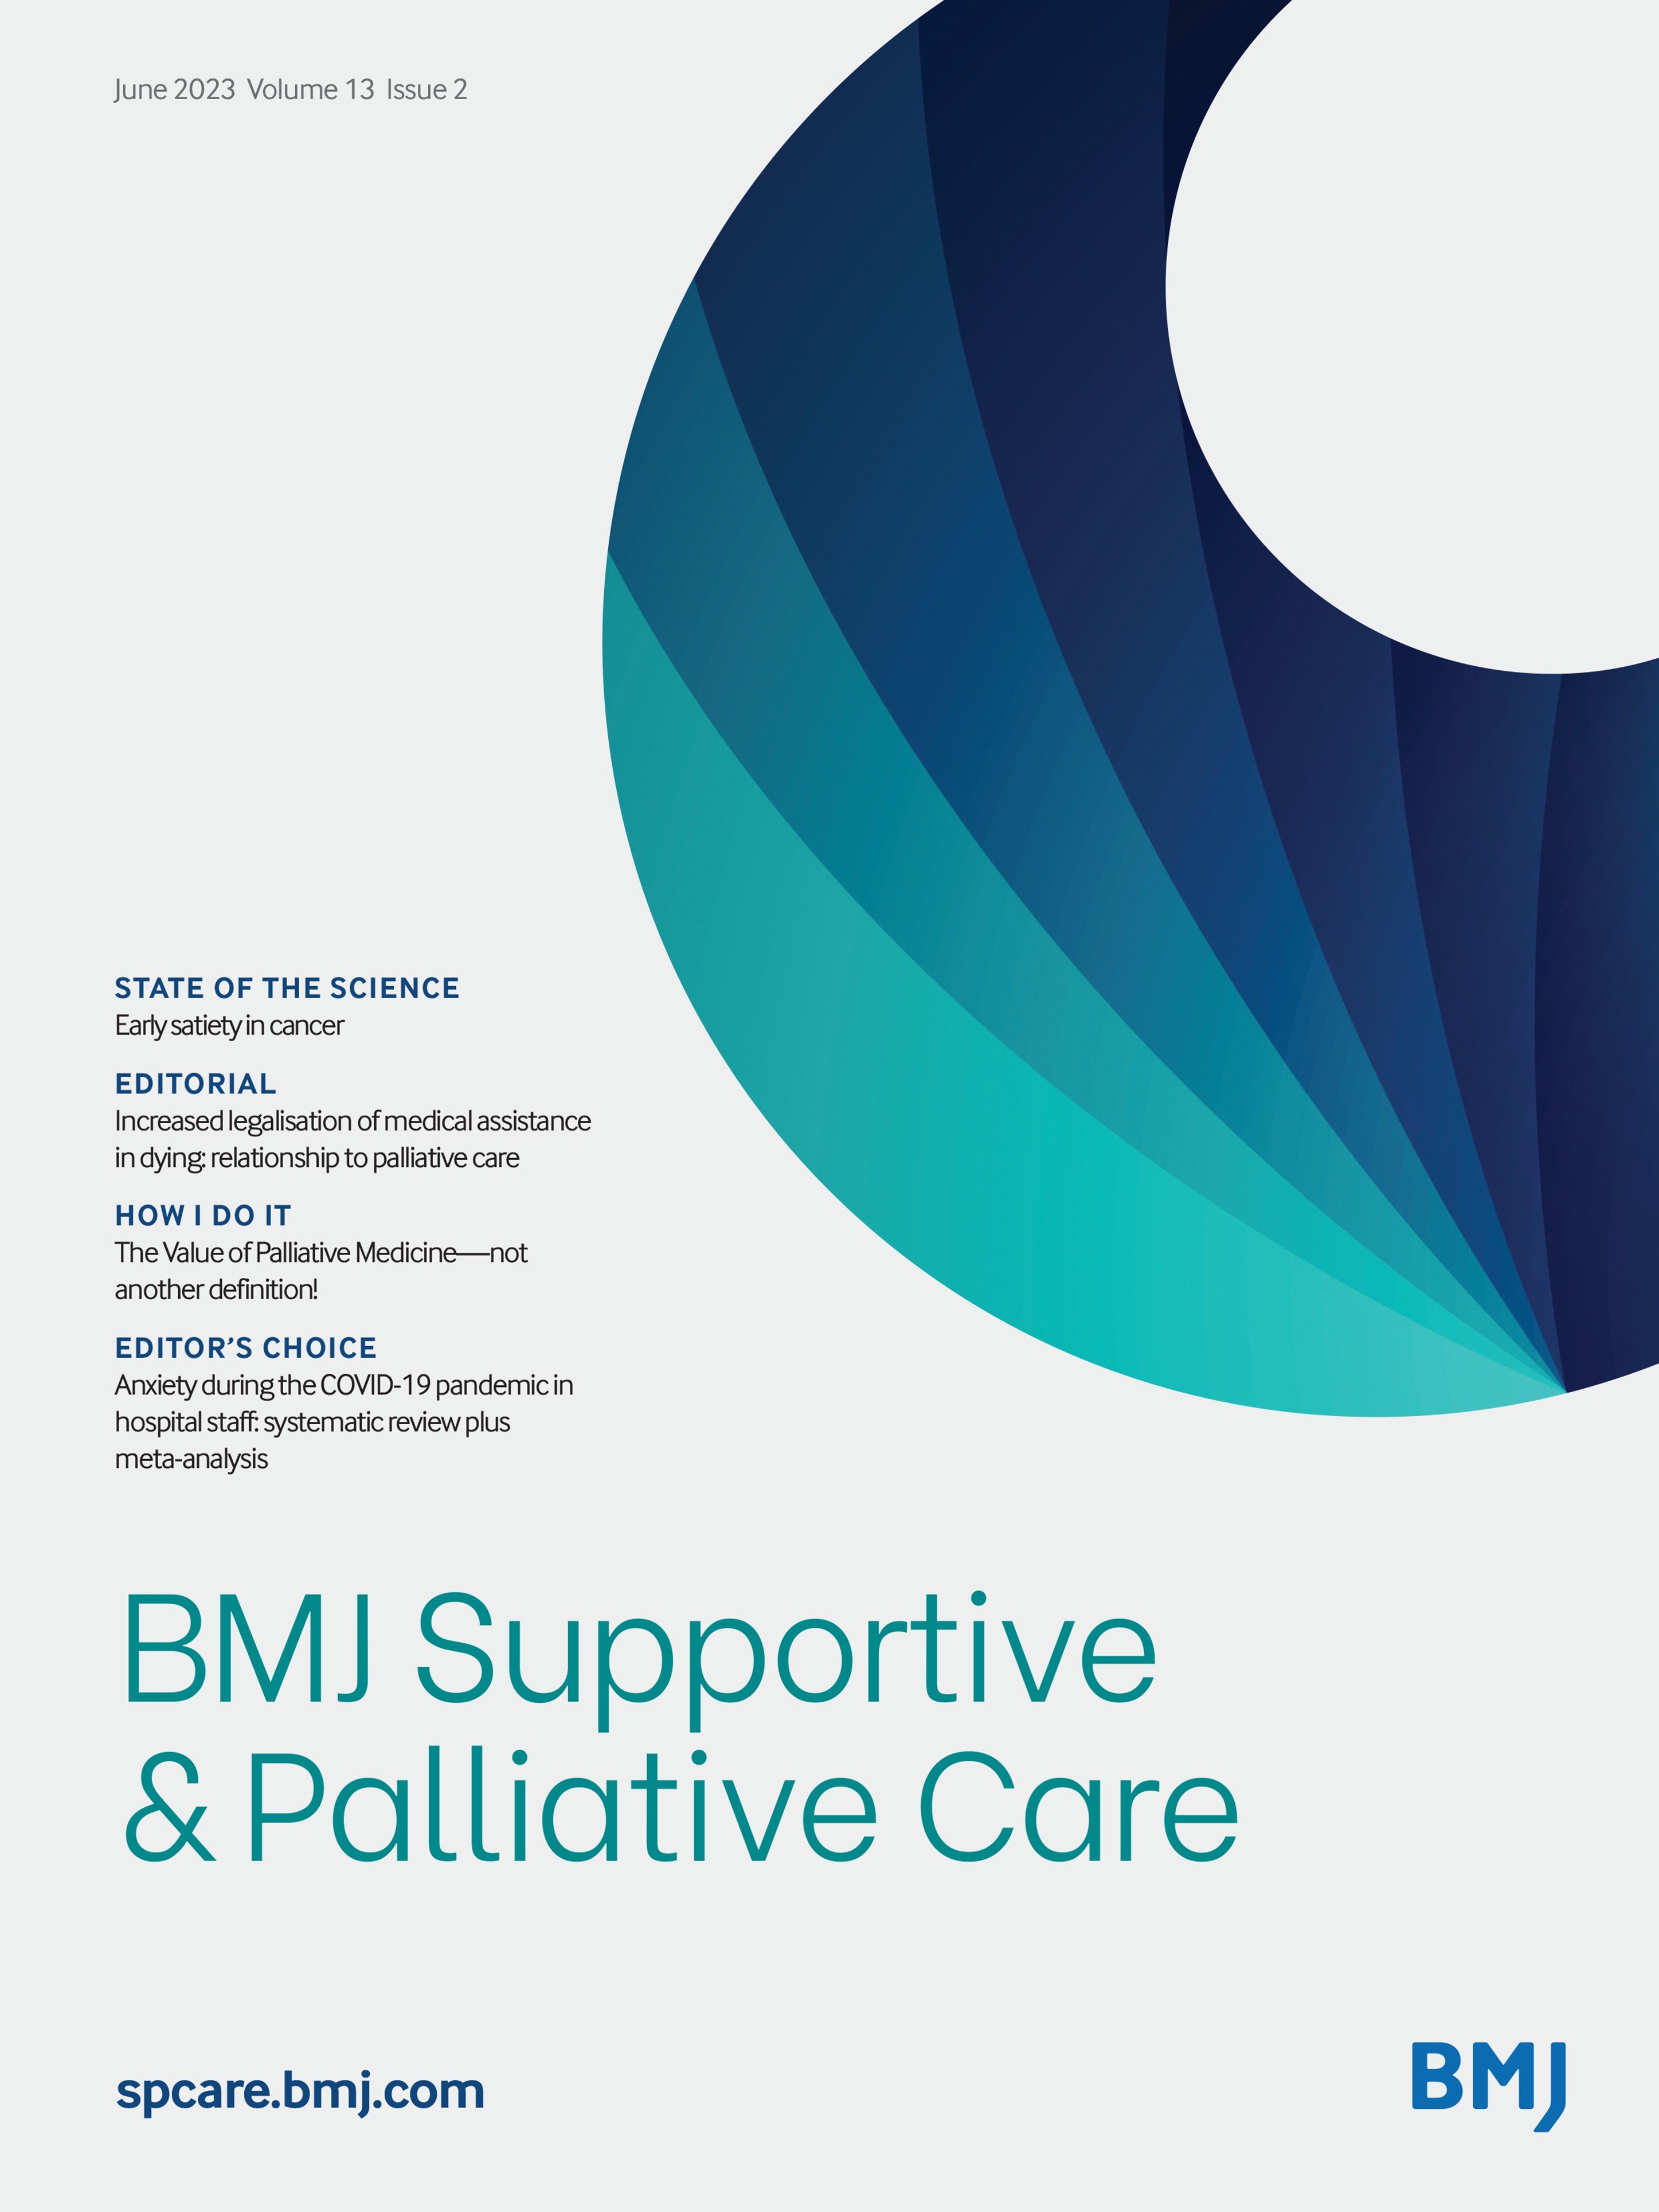 Parkinsons disease and palliative care: a quality of care Delphi study